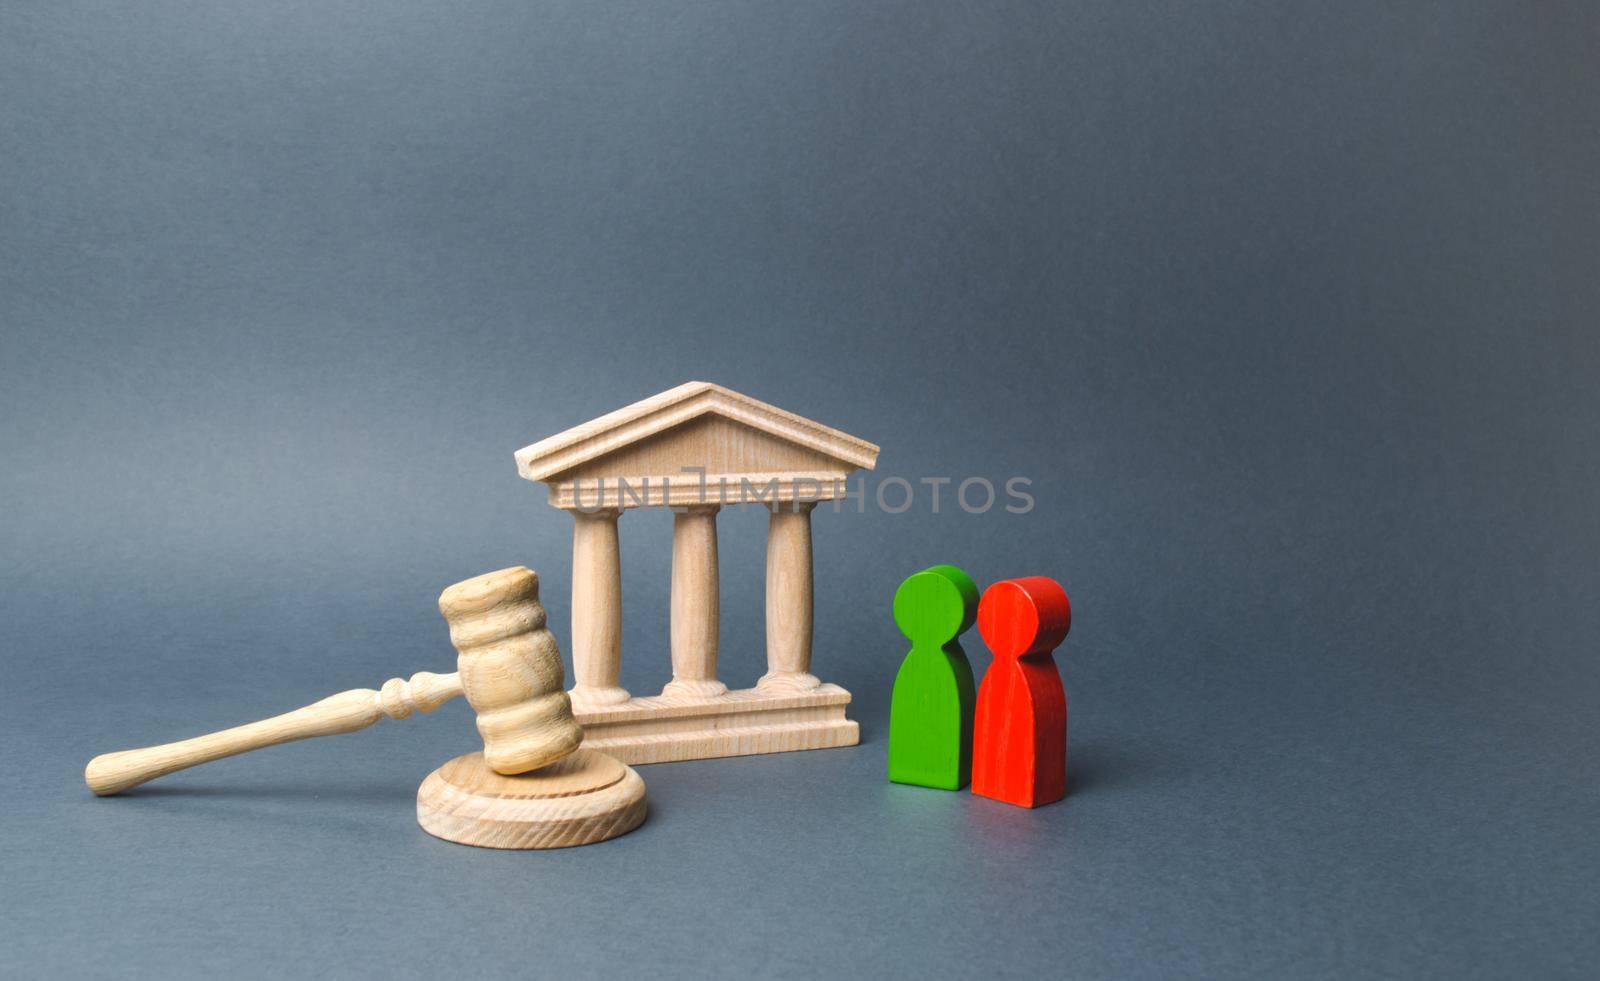 Two figures of people opponents stand near the courthouse and the judge's gavel. The judicial system. Conflict resolution in court, claimant and respondent. Court case, settling disputes.